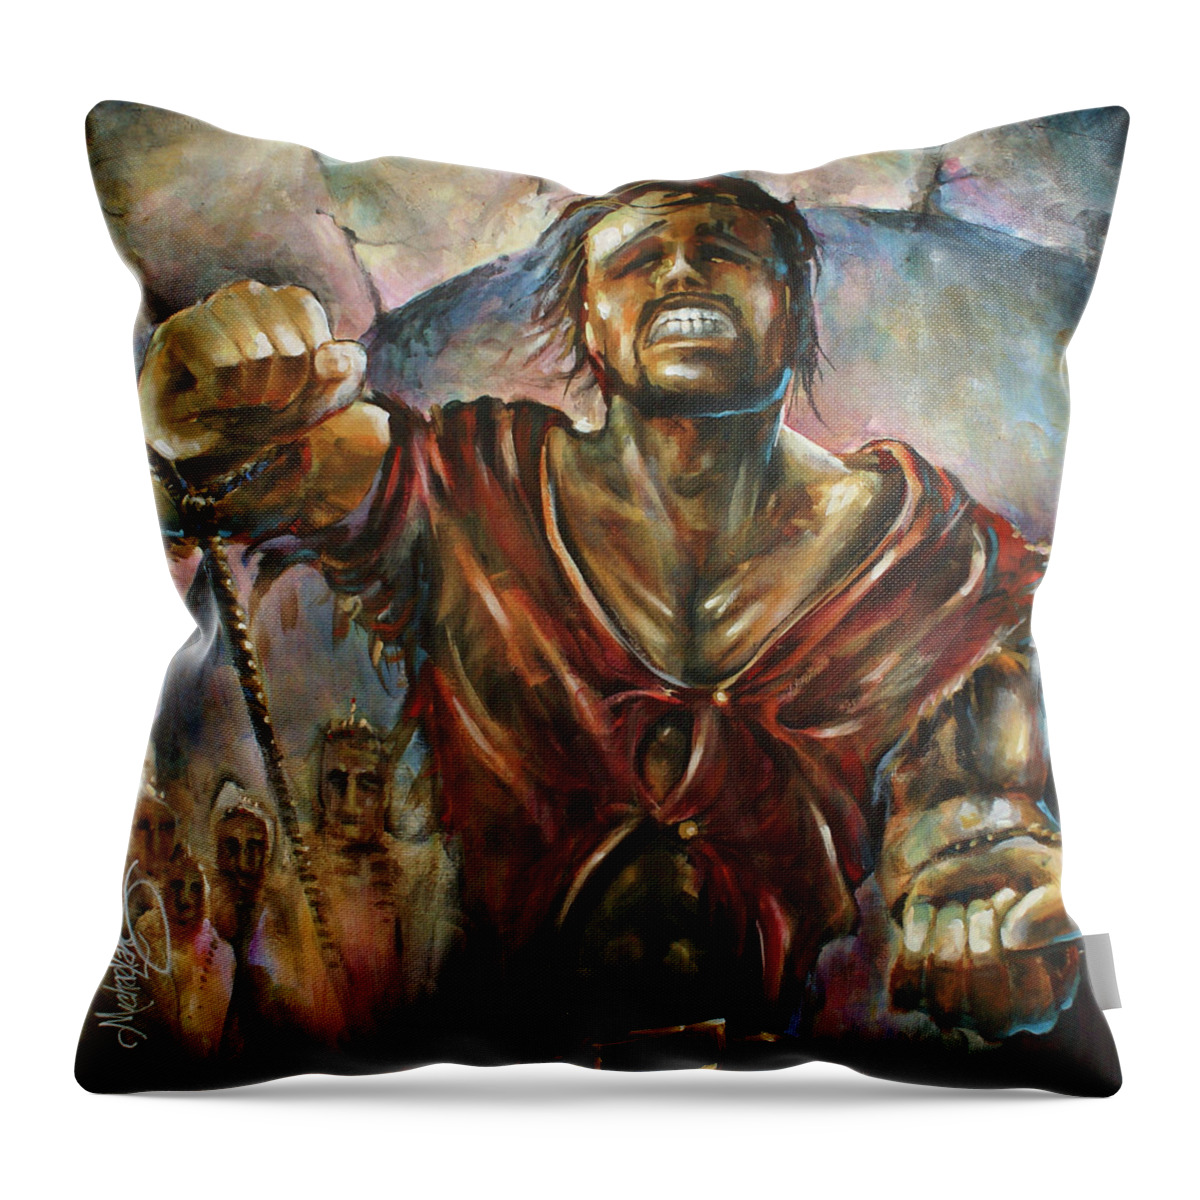 Fantasy Throw Pillow featuring the painting Escape by Michael Lang